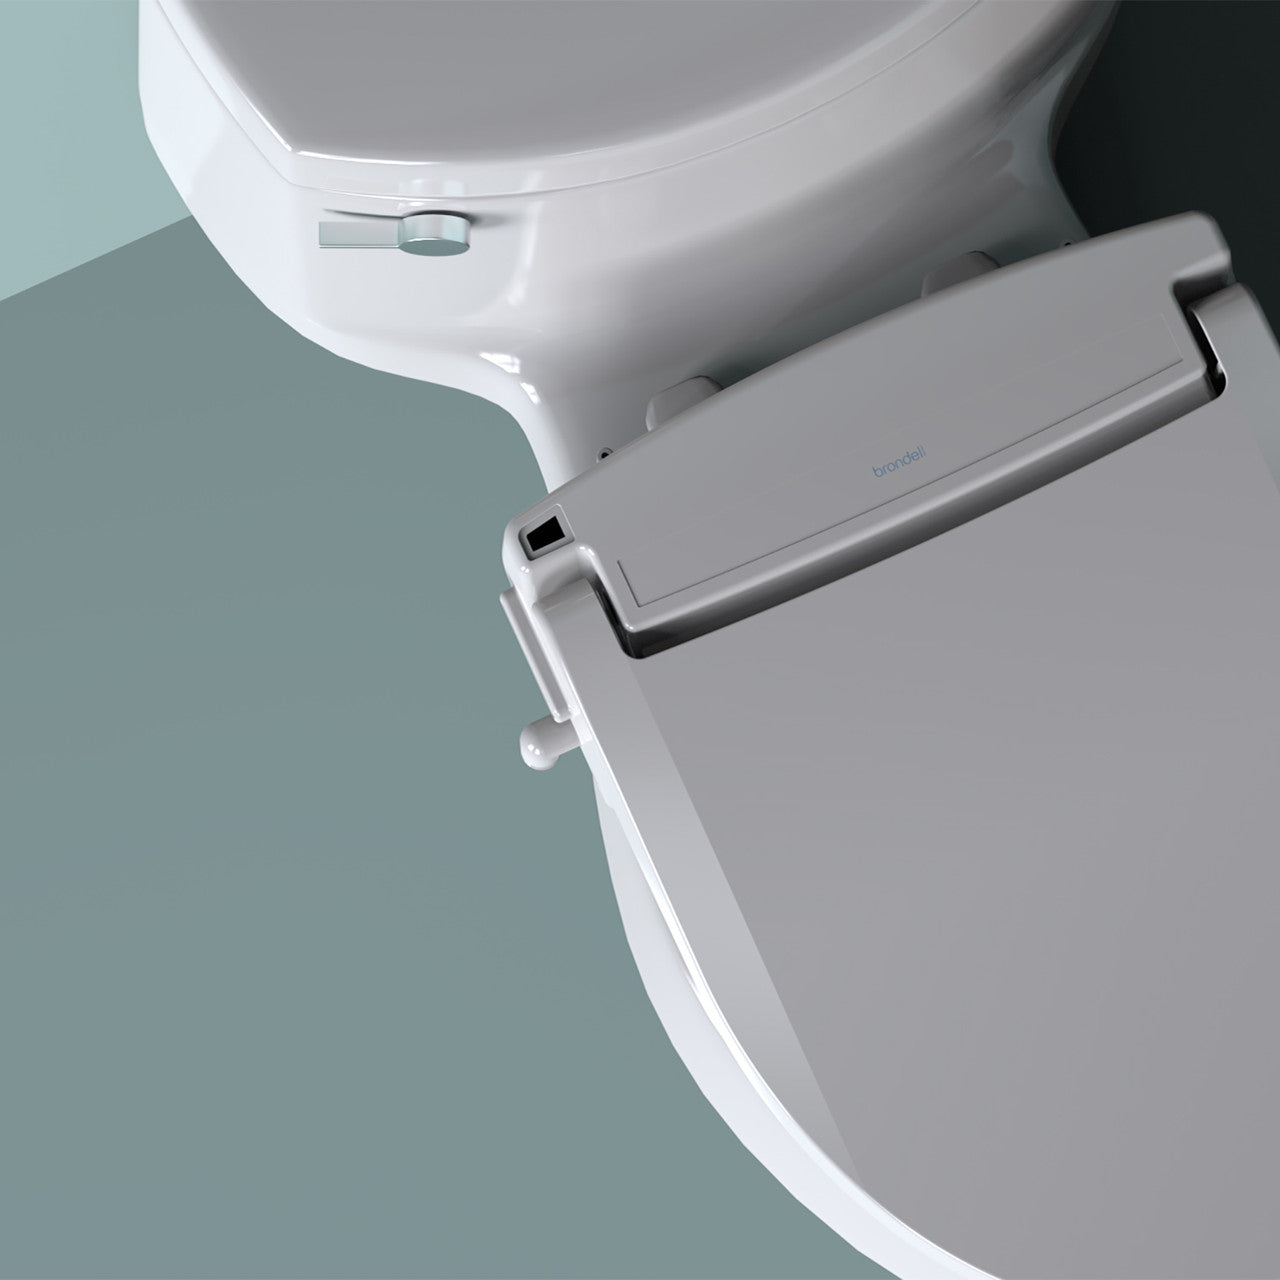 Swash Select DR802 Smart Bidet Seat with Warm Air Dryer and Deodorizer, Elongated or Round